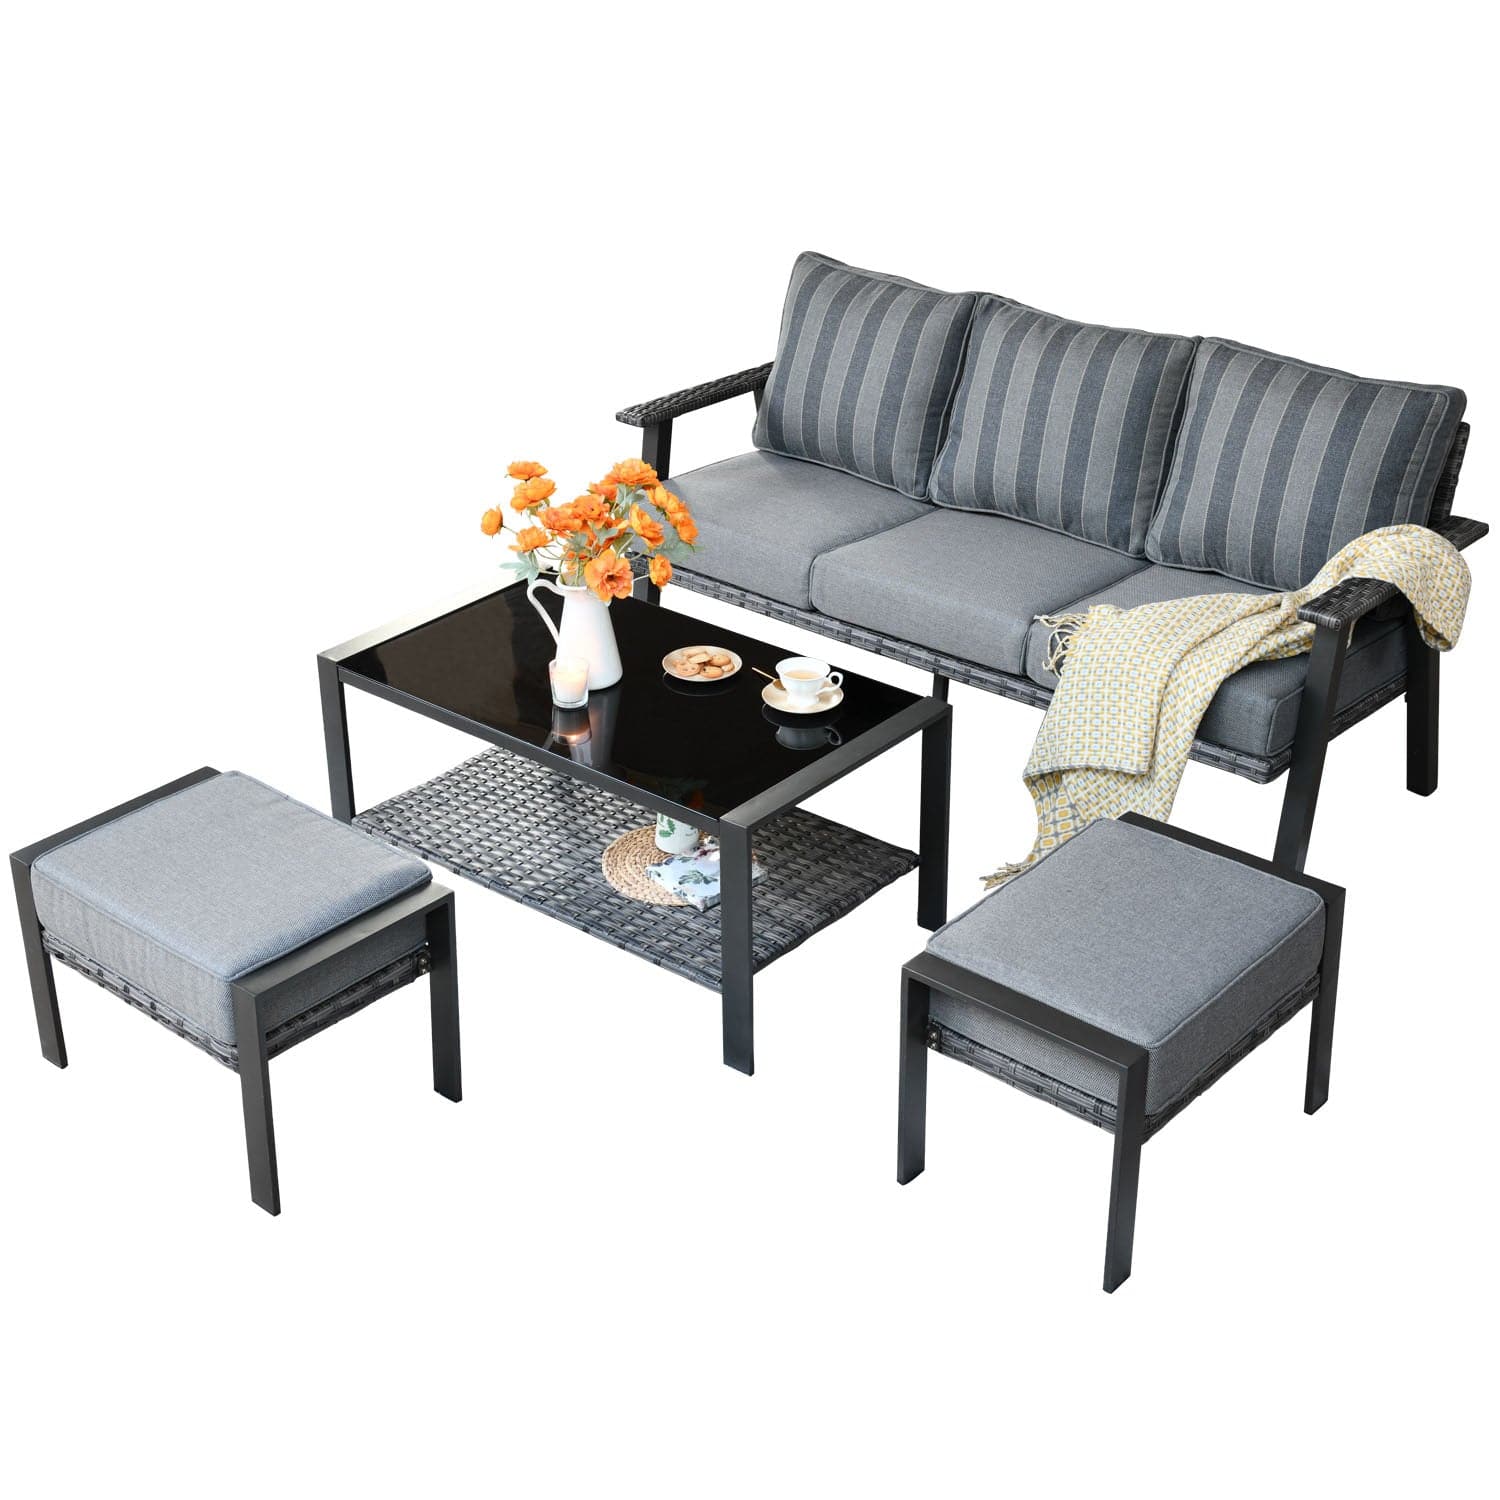 Ovios Outdoor Bistro Table Set 4 Piece with 5'' Cushion, Olefin Fabric